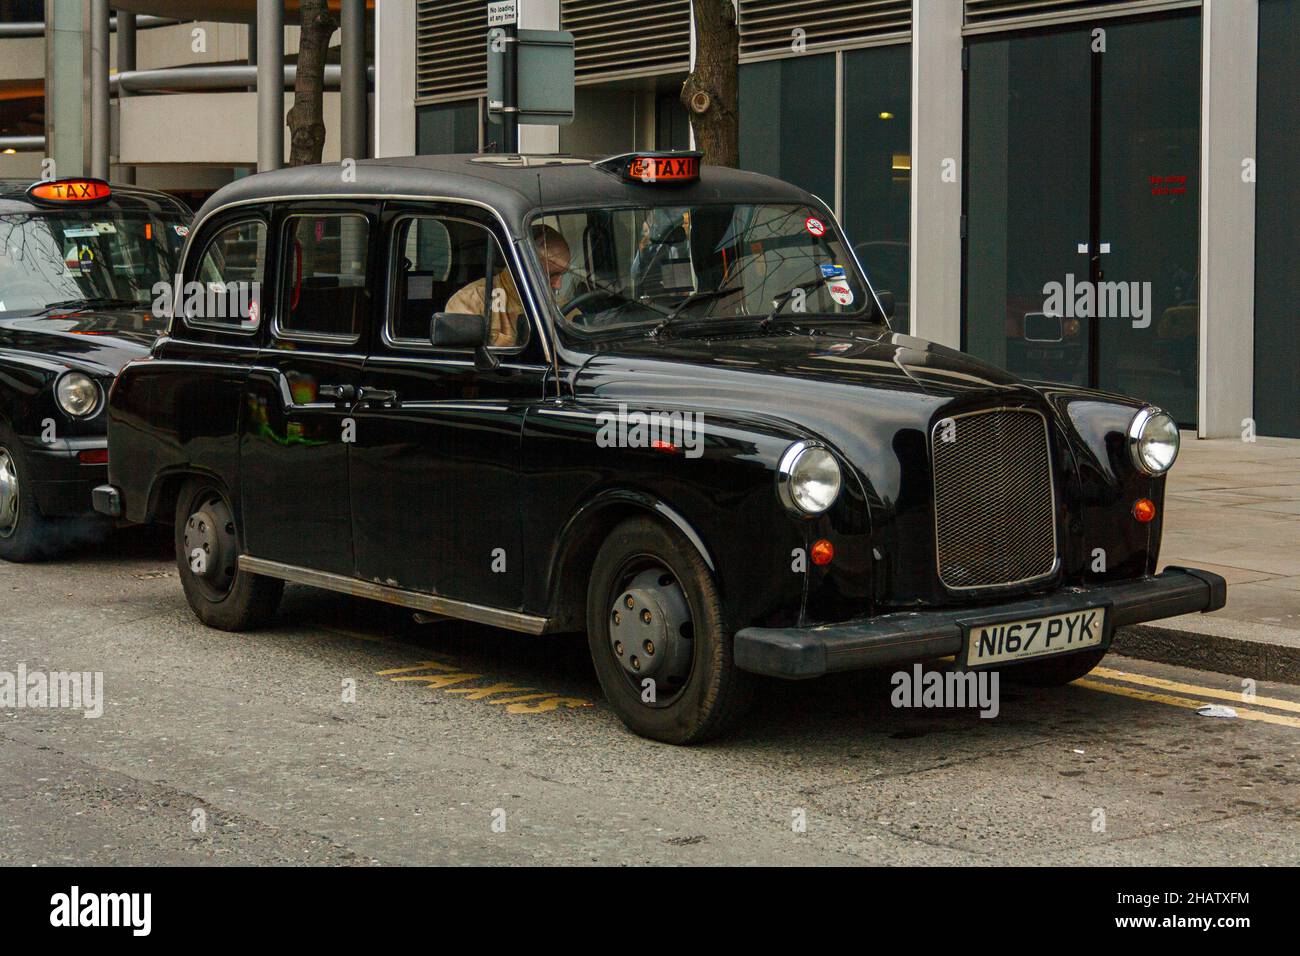 London, United Kingdom; March 16th 2011: Typical London taxi. Stock Photo